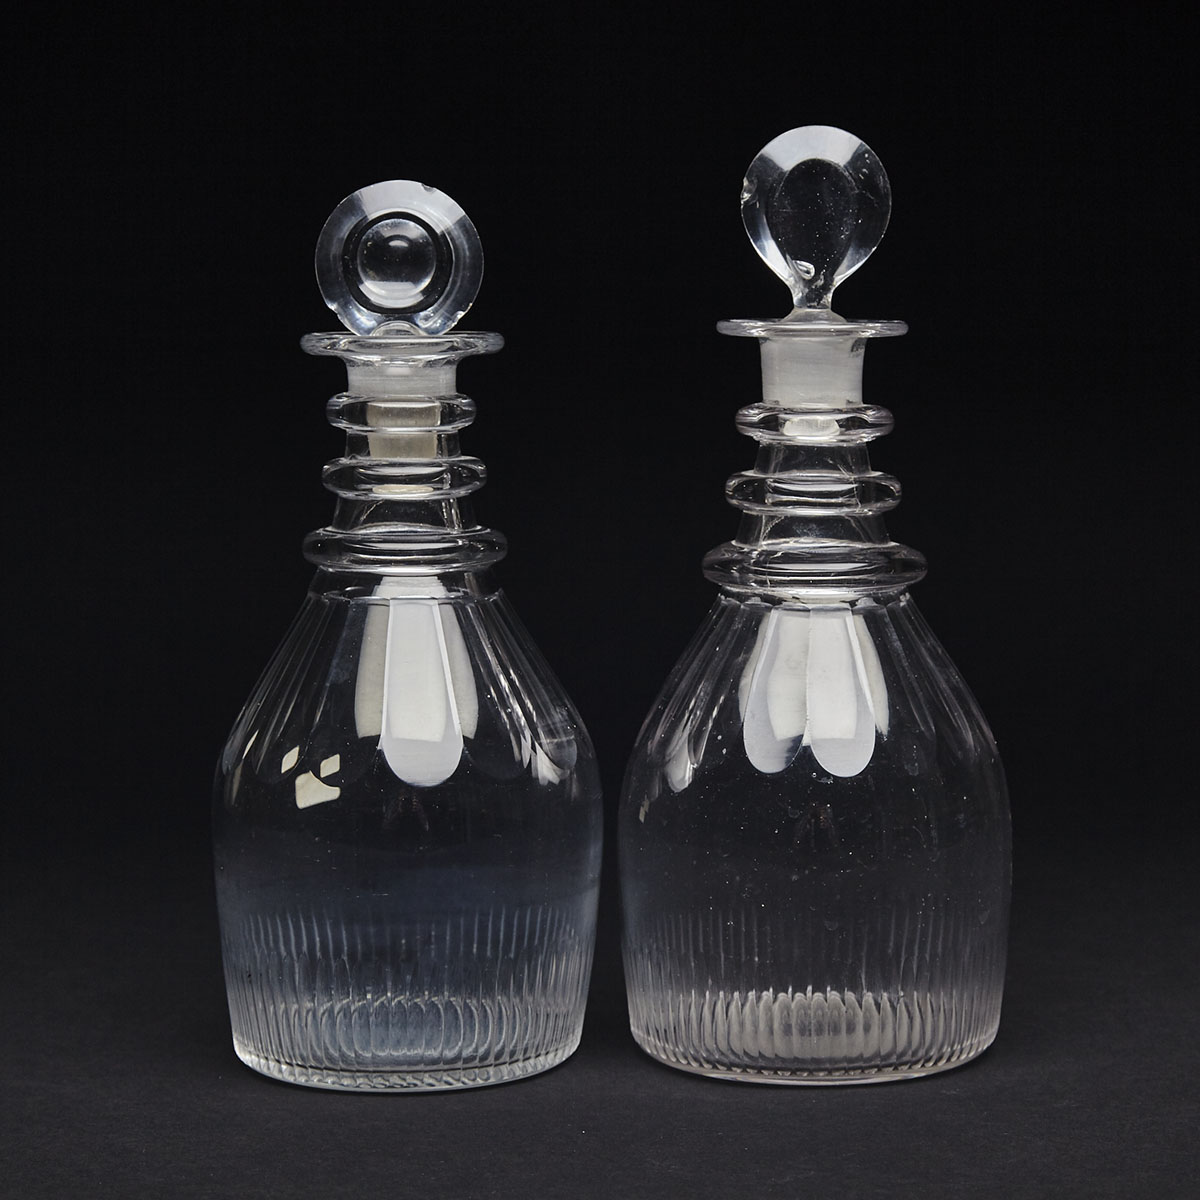 Pair of English Cut Glass Decanters, c.1820